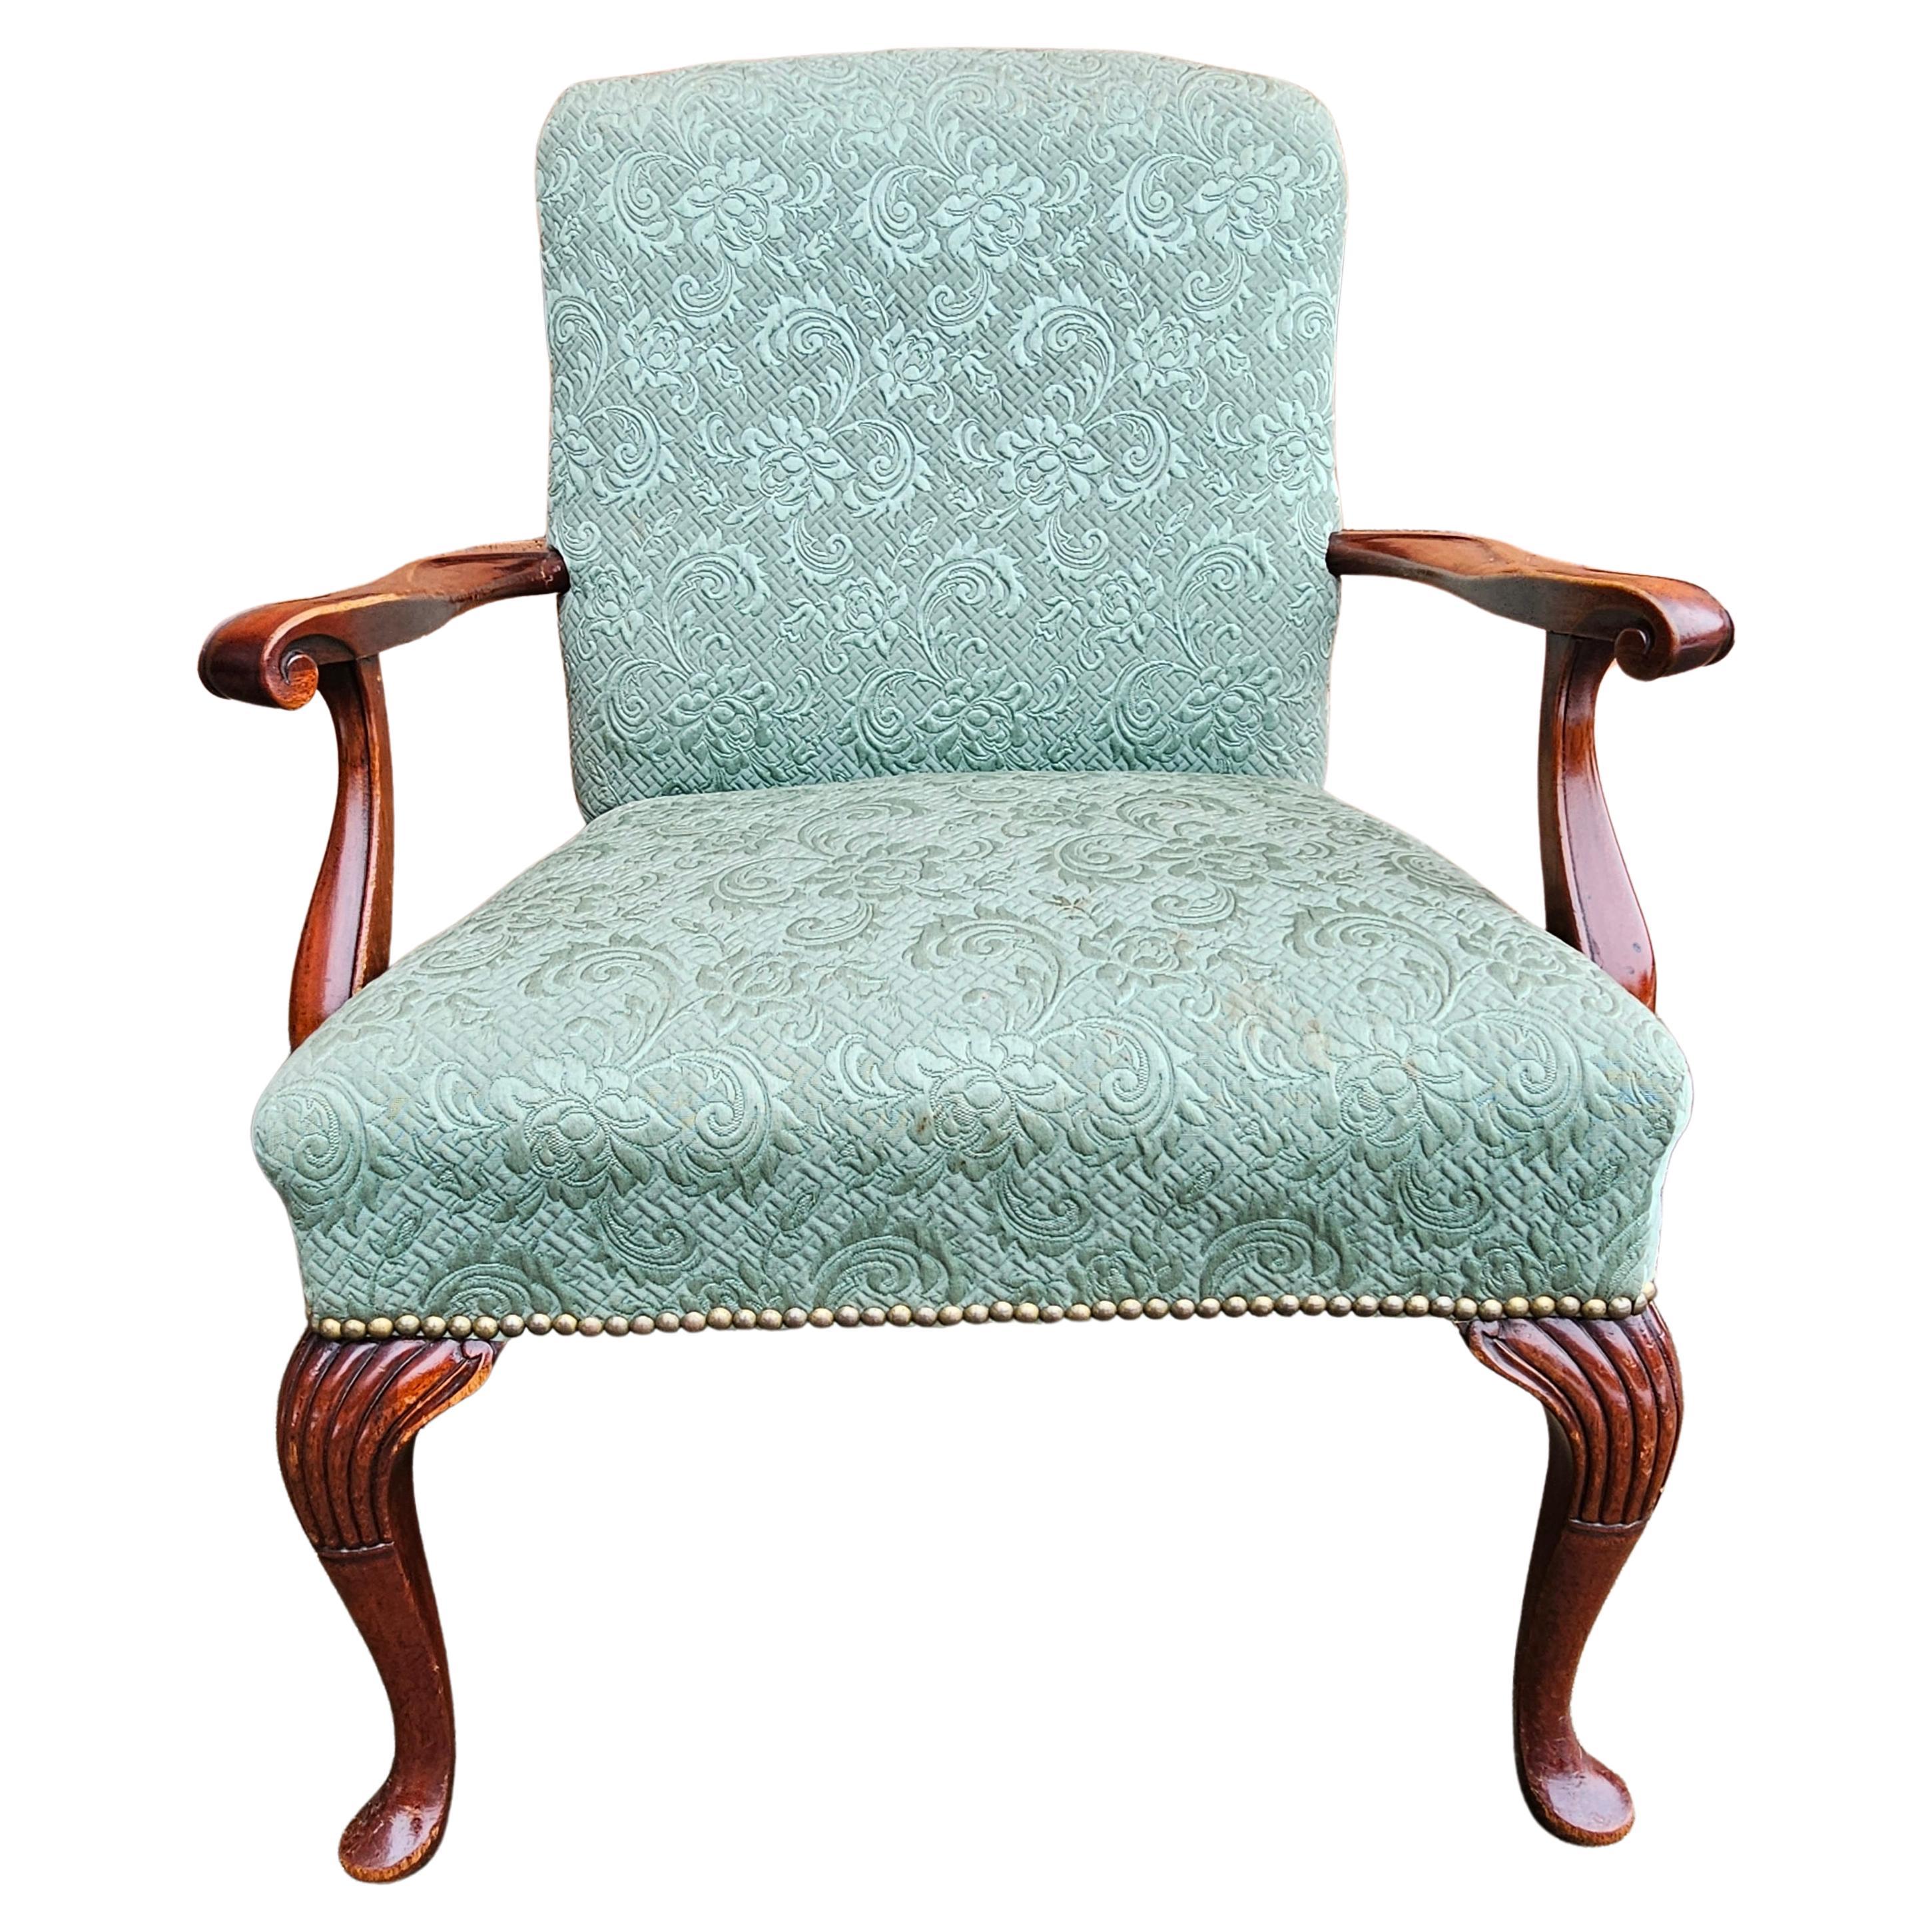 Mid 20th Century Queen Anne Style Mahogany Upholstered Armchair For Sale